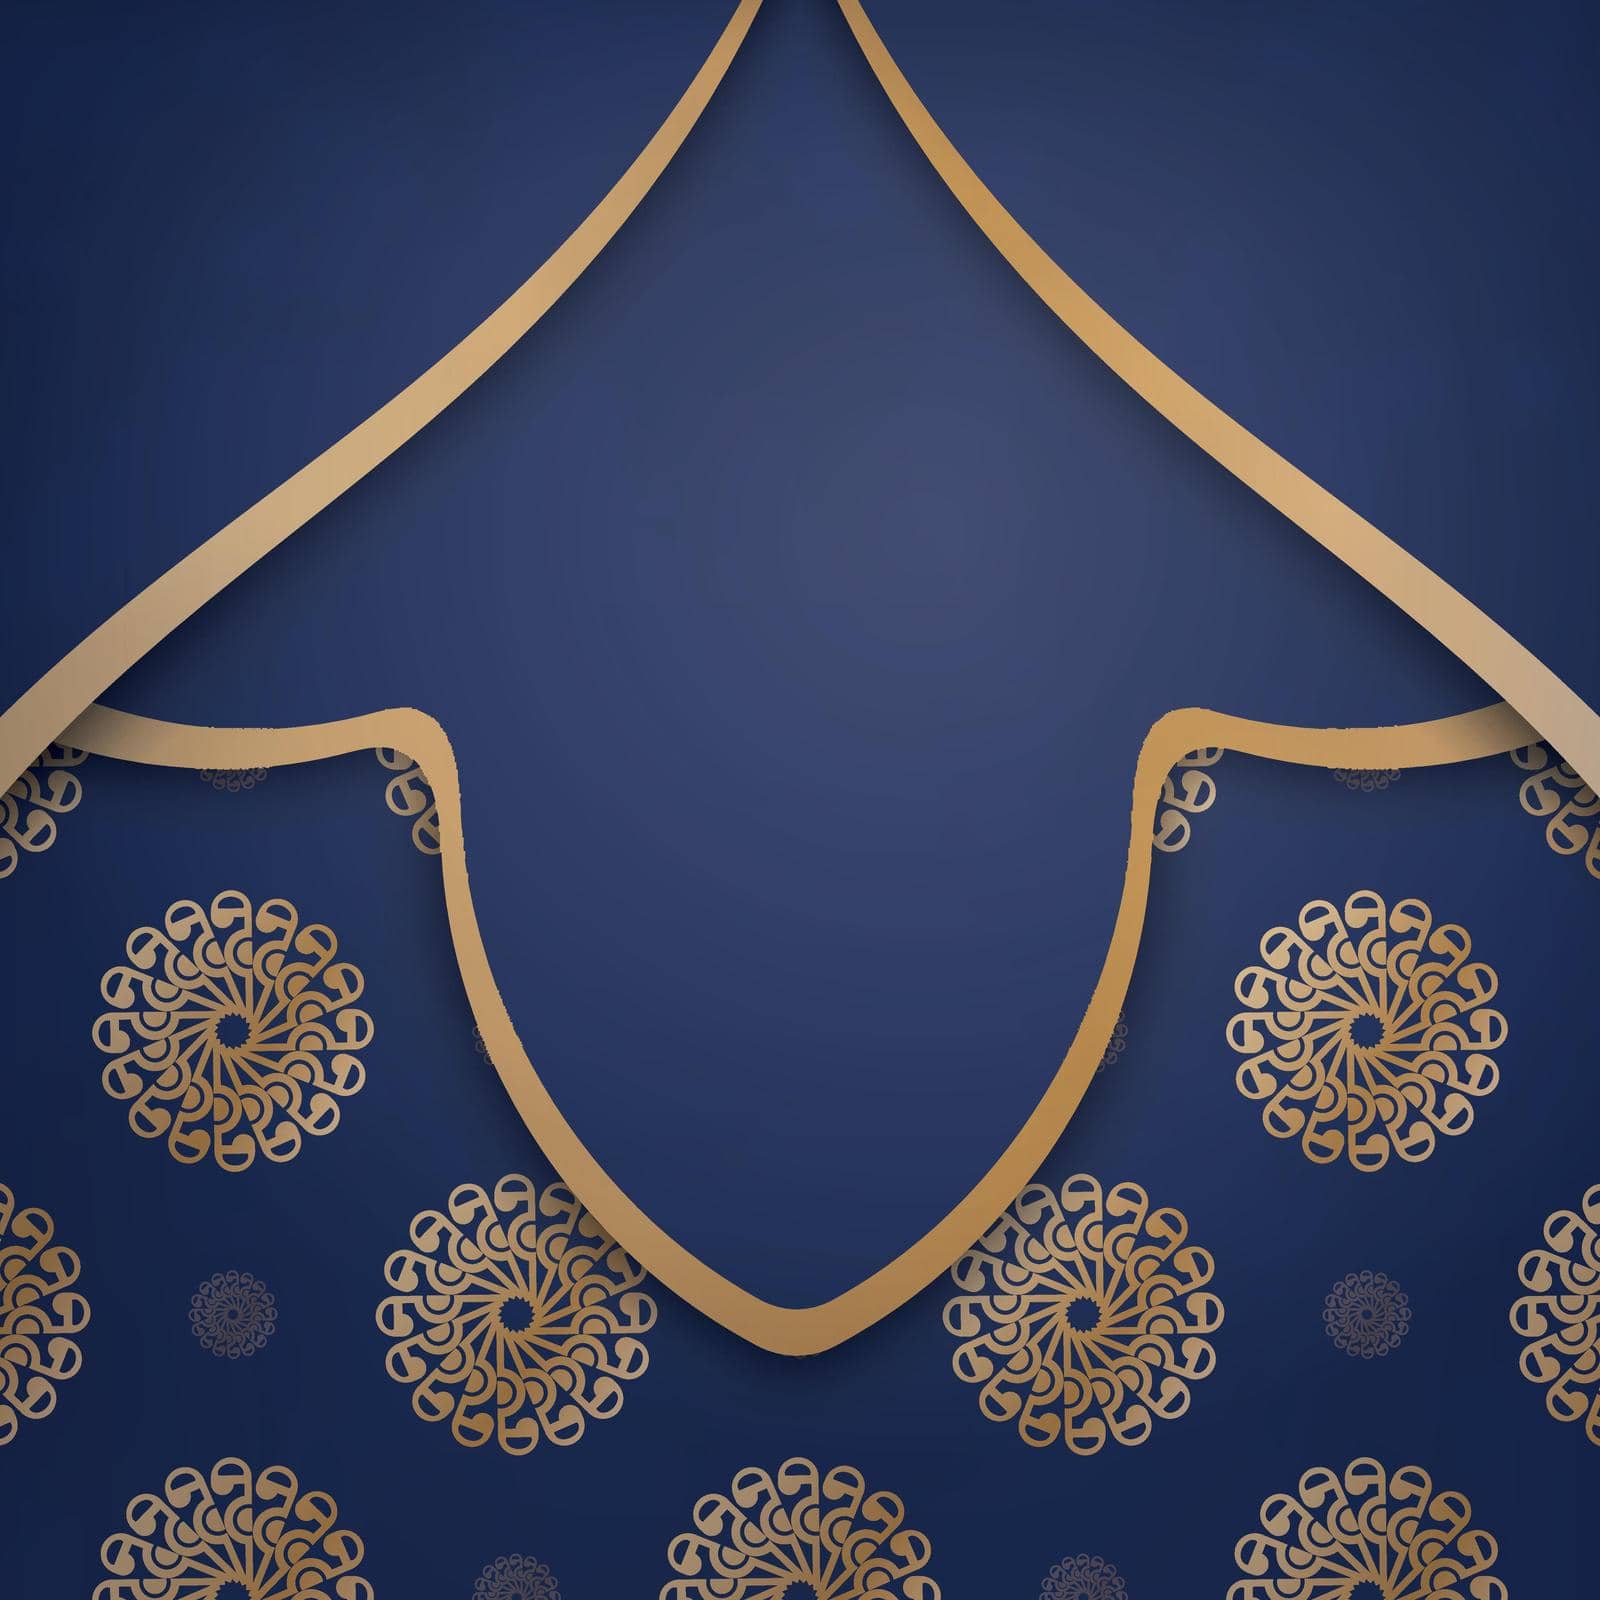 Business card template in dark blue with luxurious gold ornaments for your brand. by Javvani